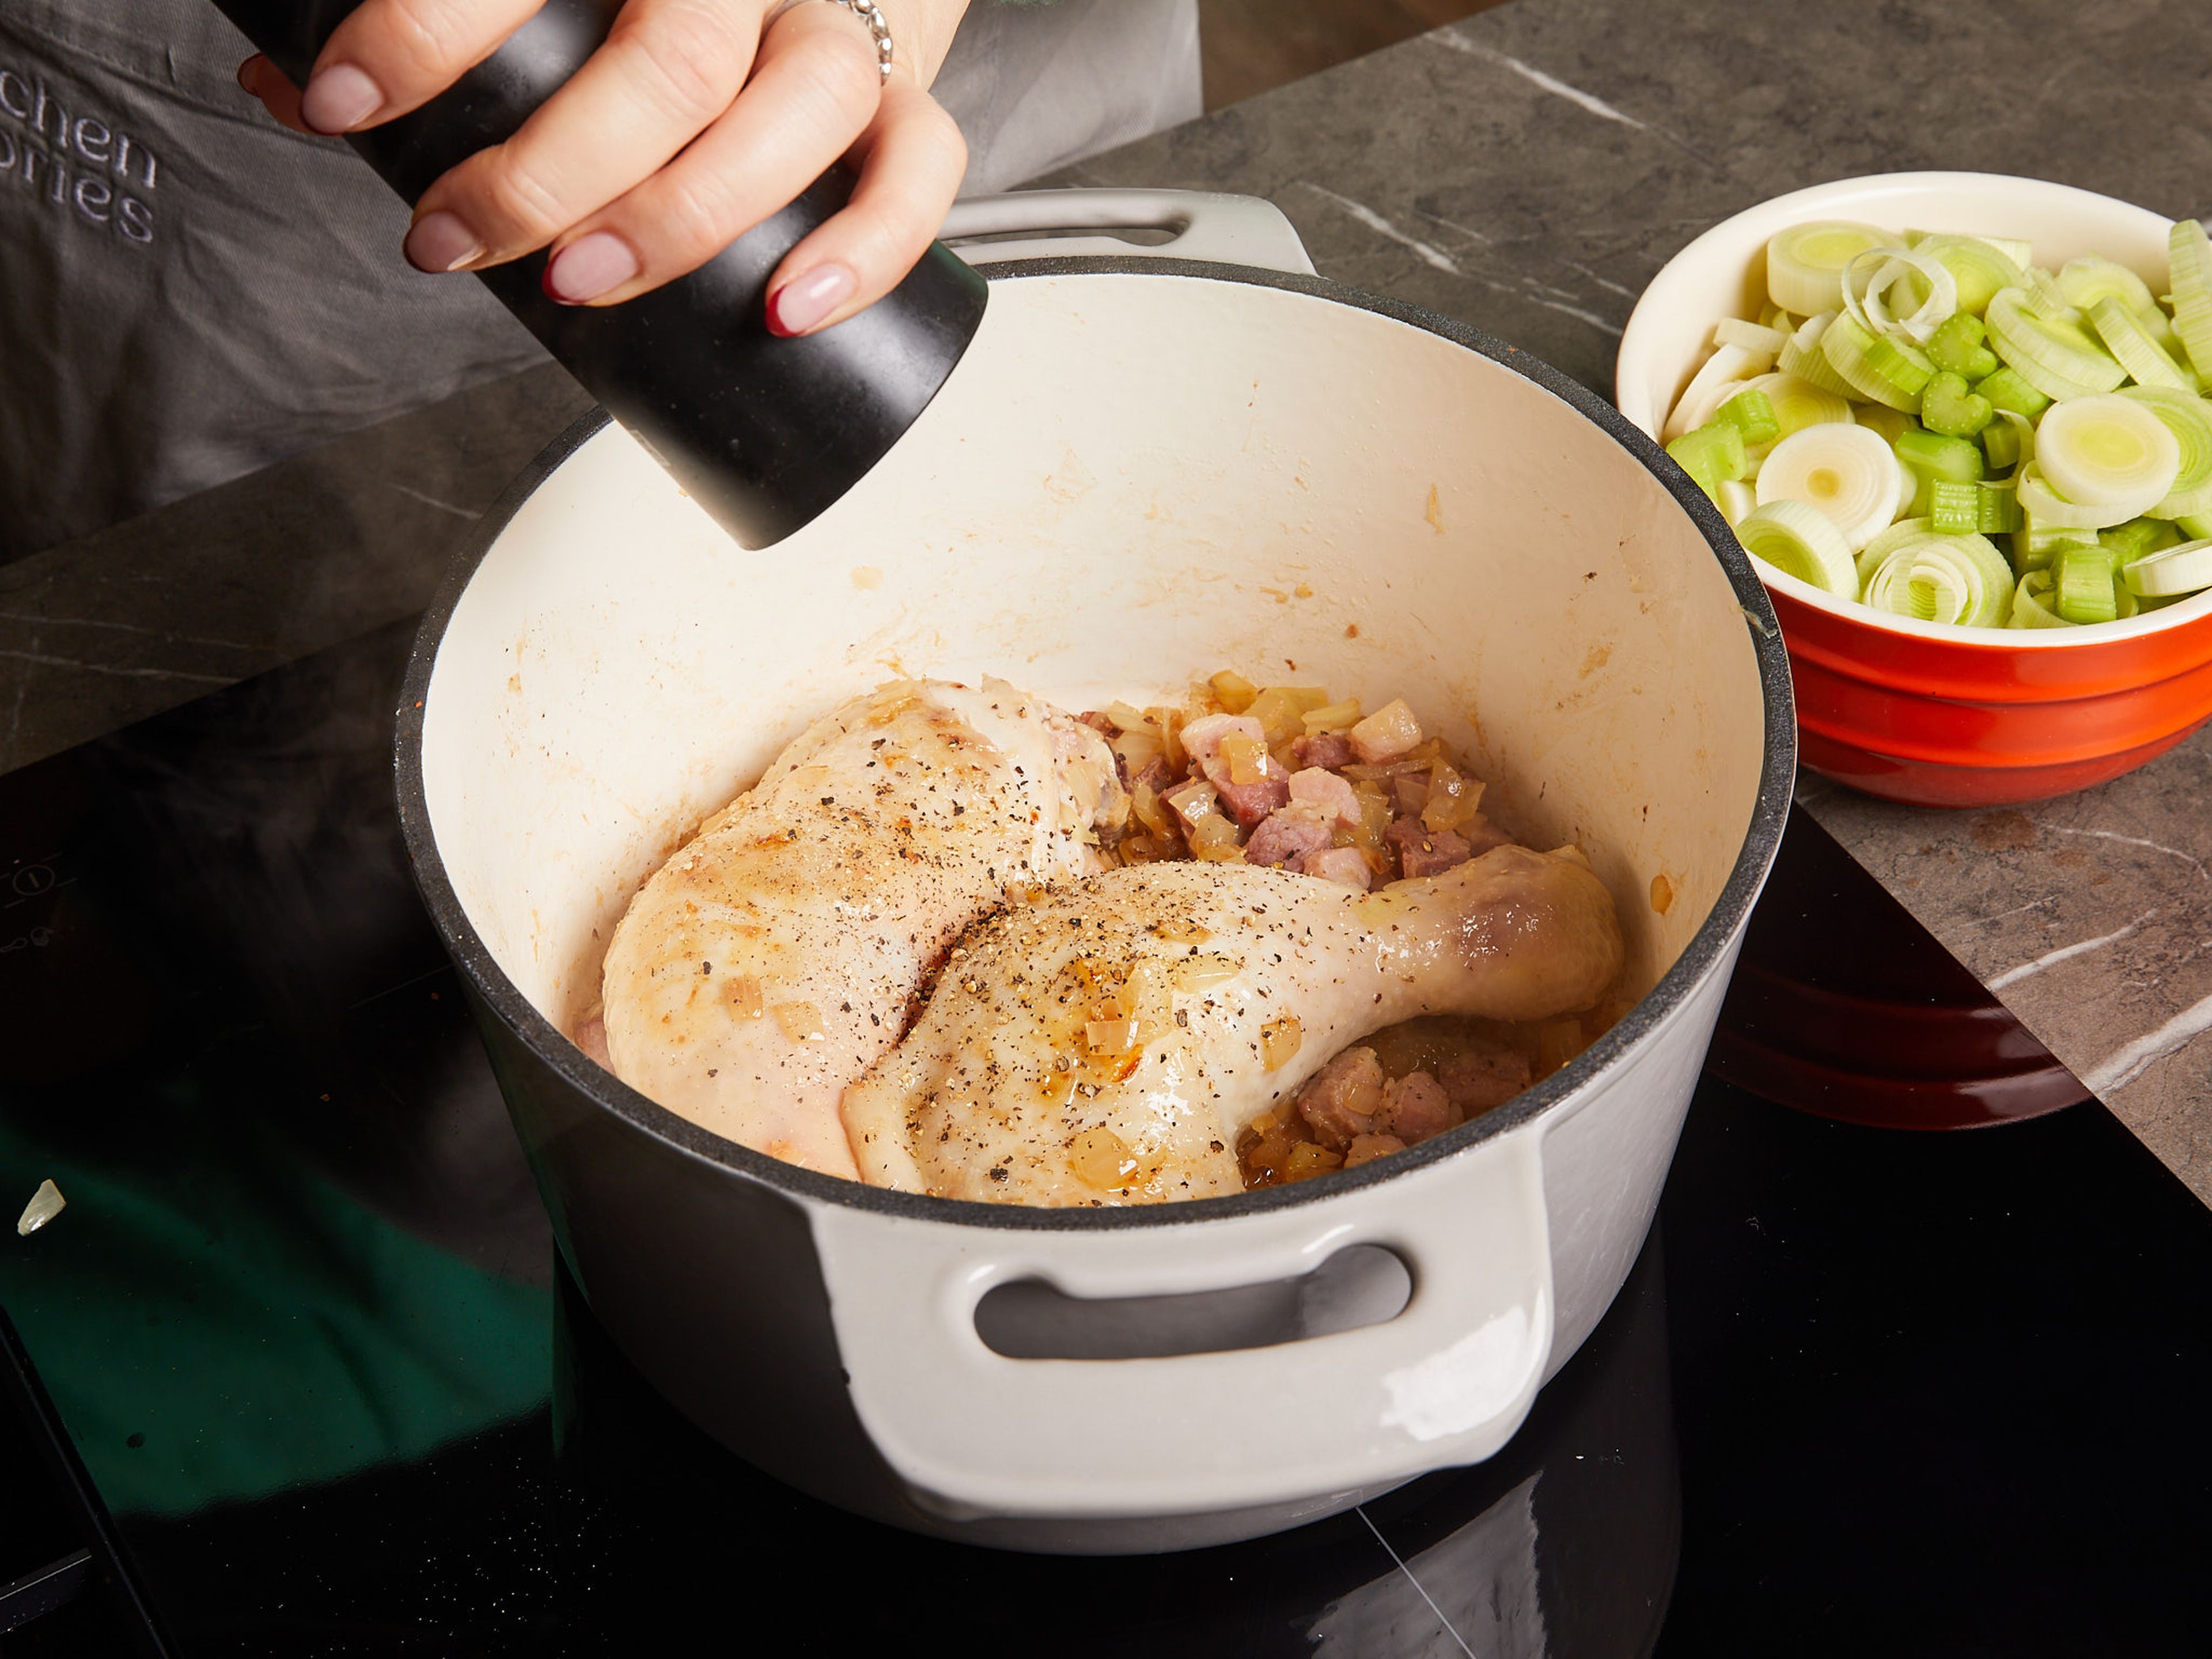 Melt butter in a large pot over medium-high heat. Add onion and bacon and fry for approx. 2–3 min. Add chicken drumsticks and fry for approx. 3–5 min. Season with salt and pepper.